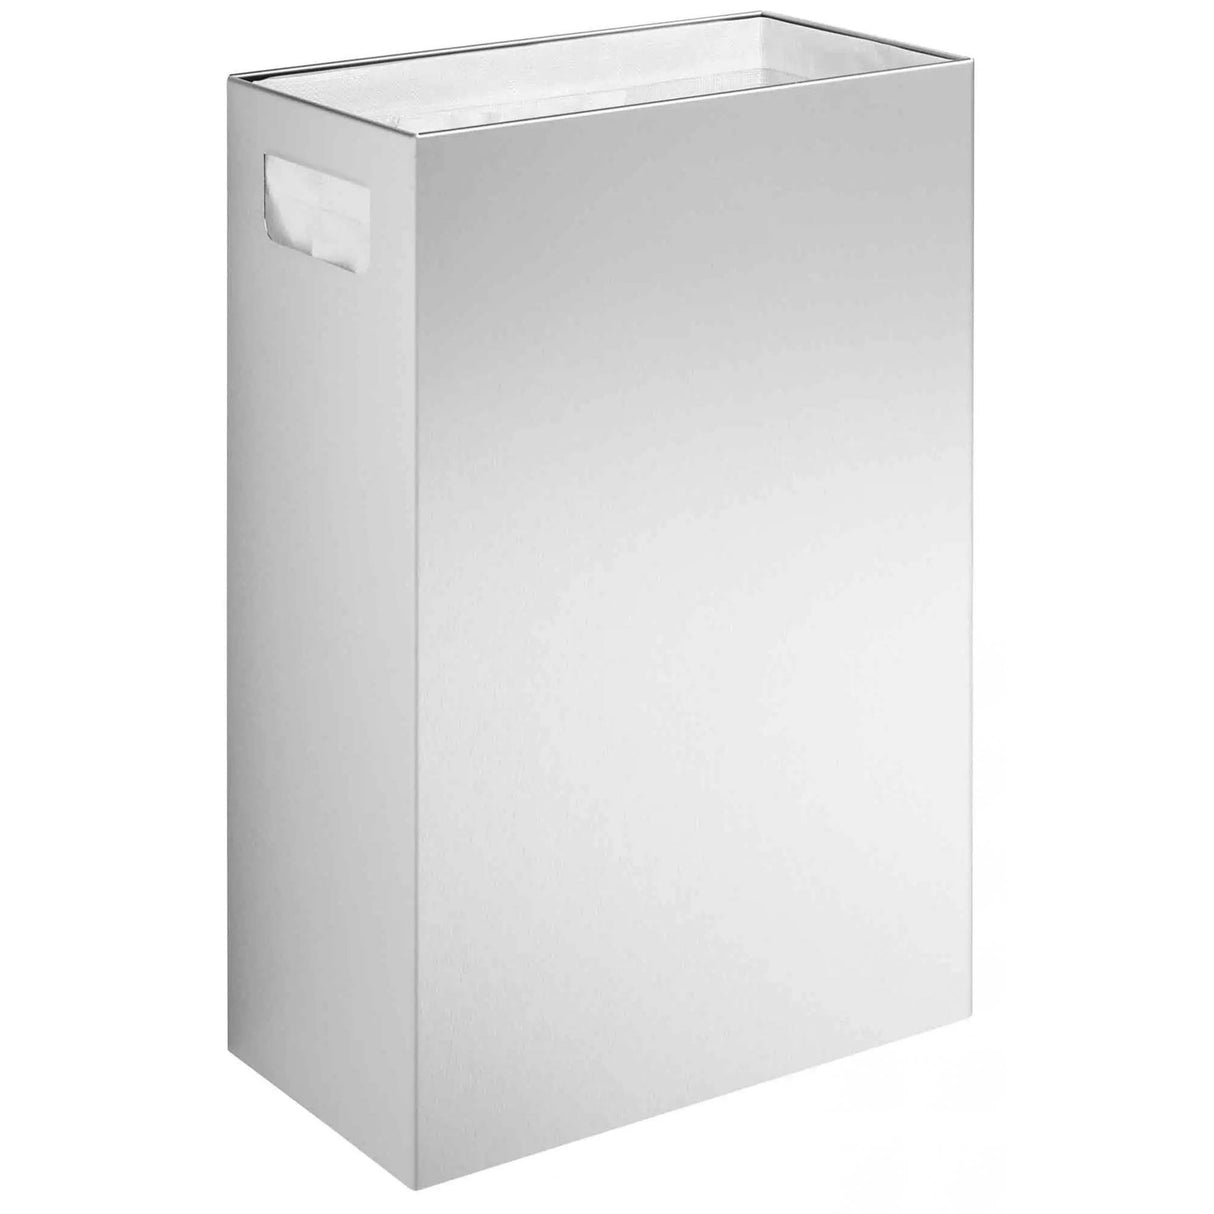 DP5108 Dolphin DOC M Waste Bin with Integrated Handles